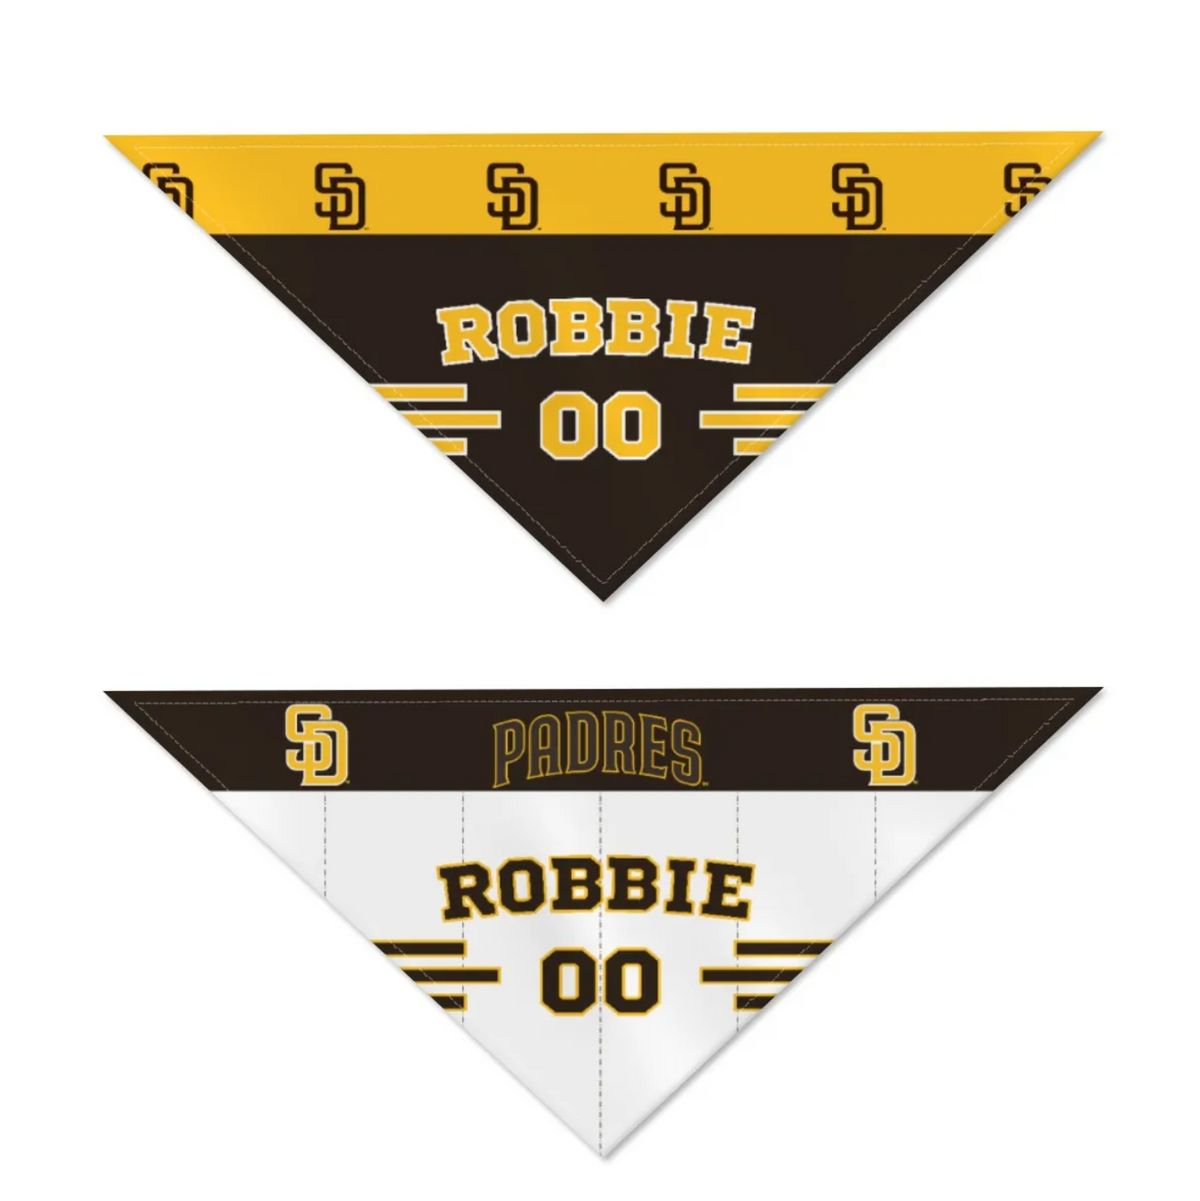 San Diego Padres Home/Road Personalized Reversible Bandana - 3 Red Rovers